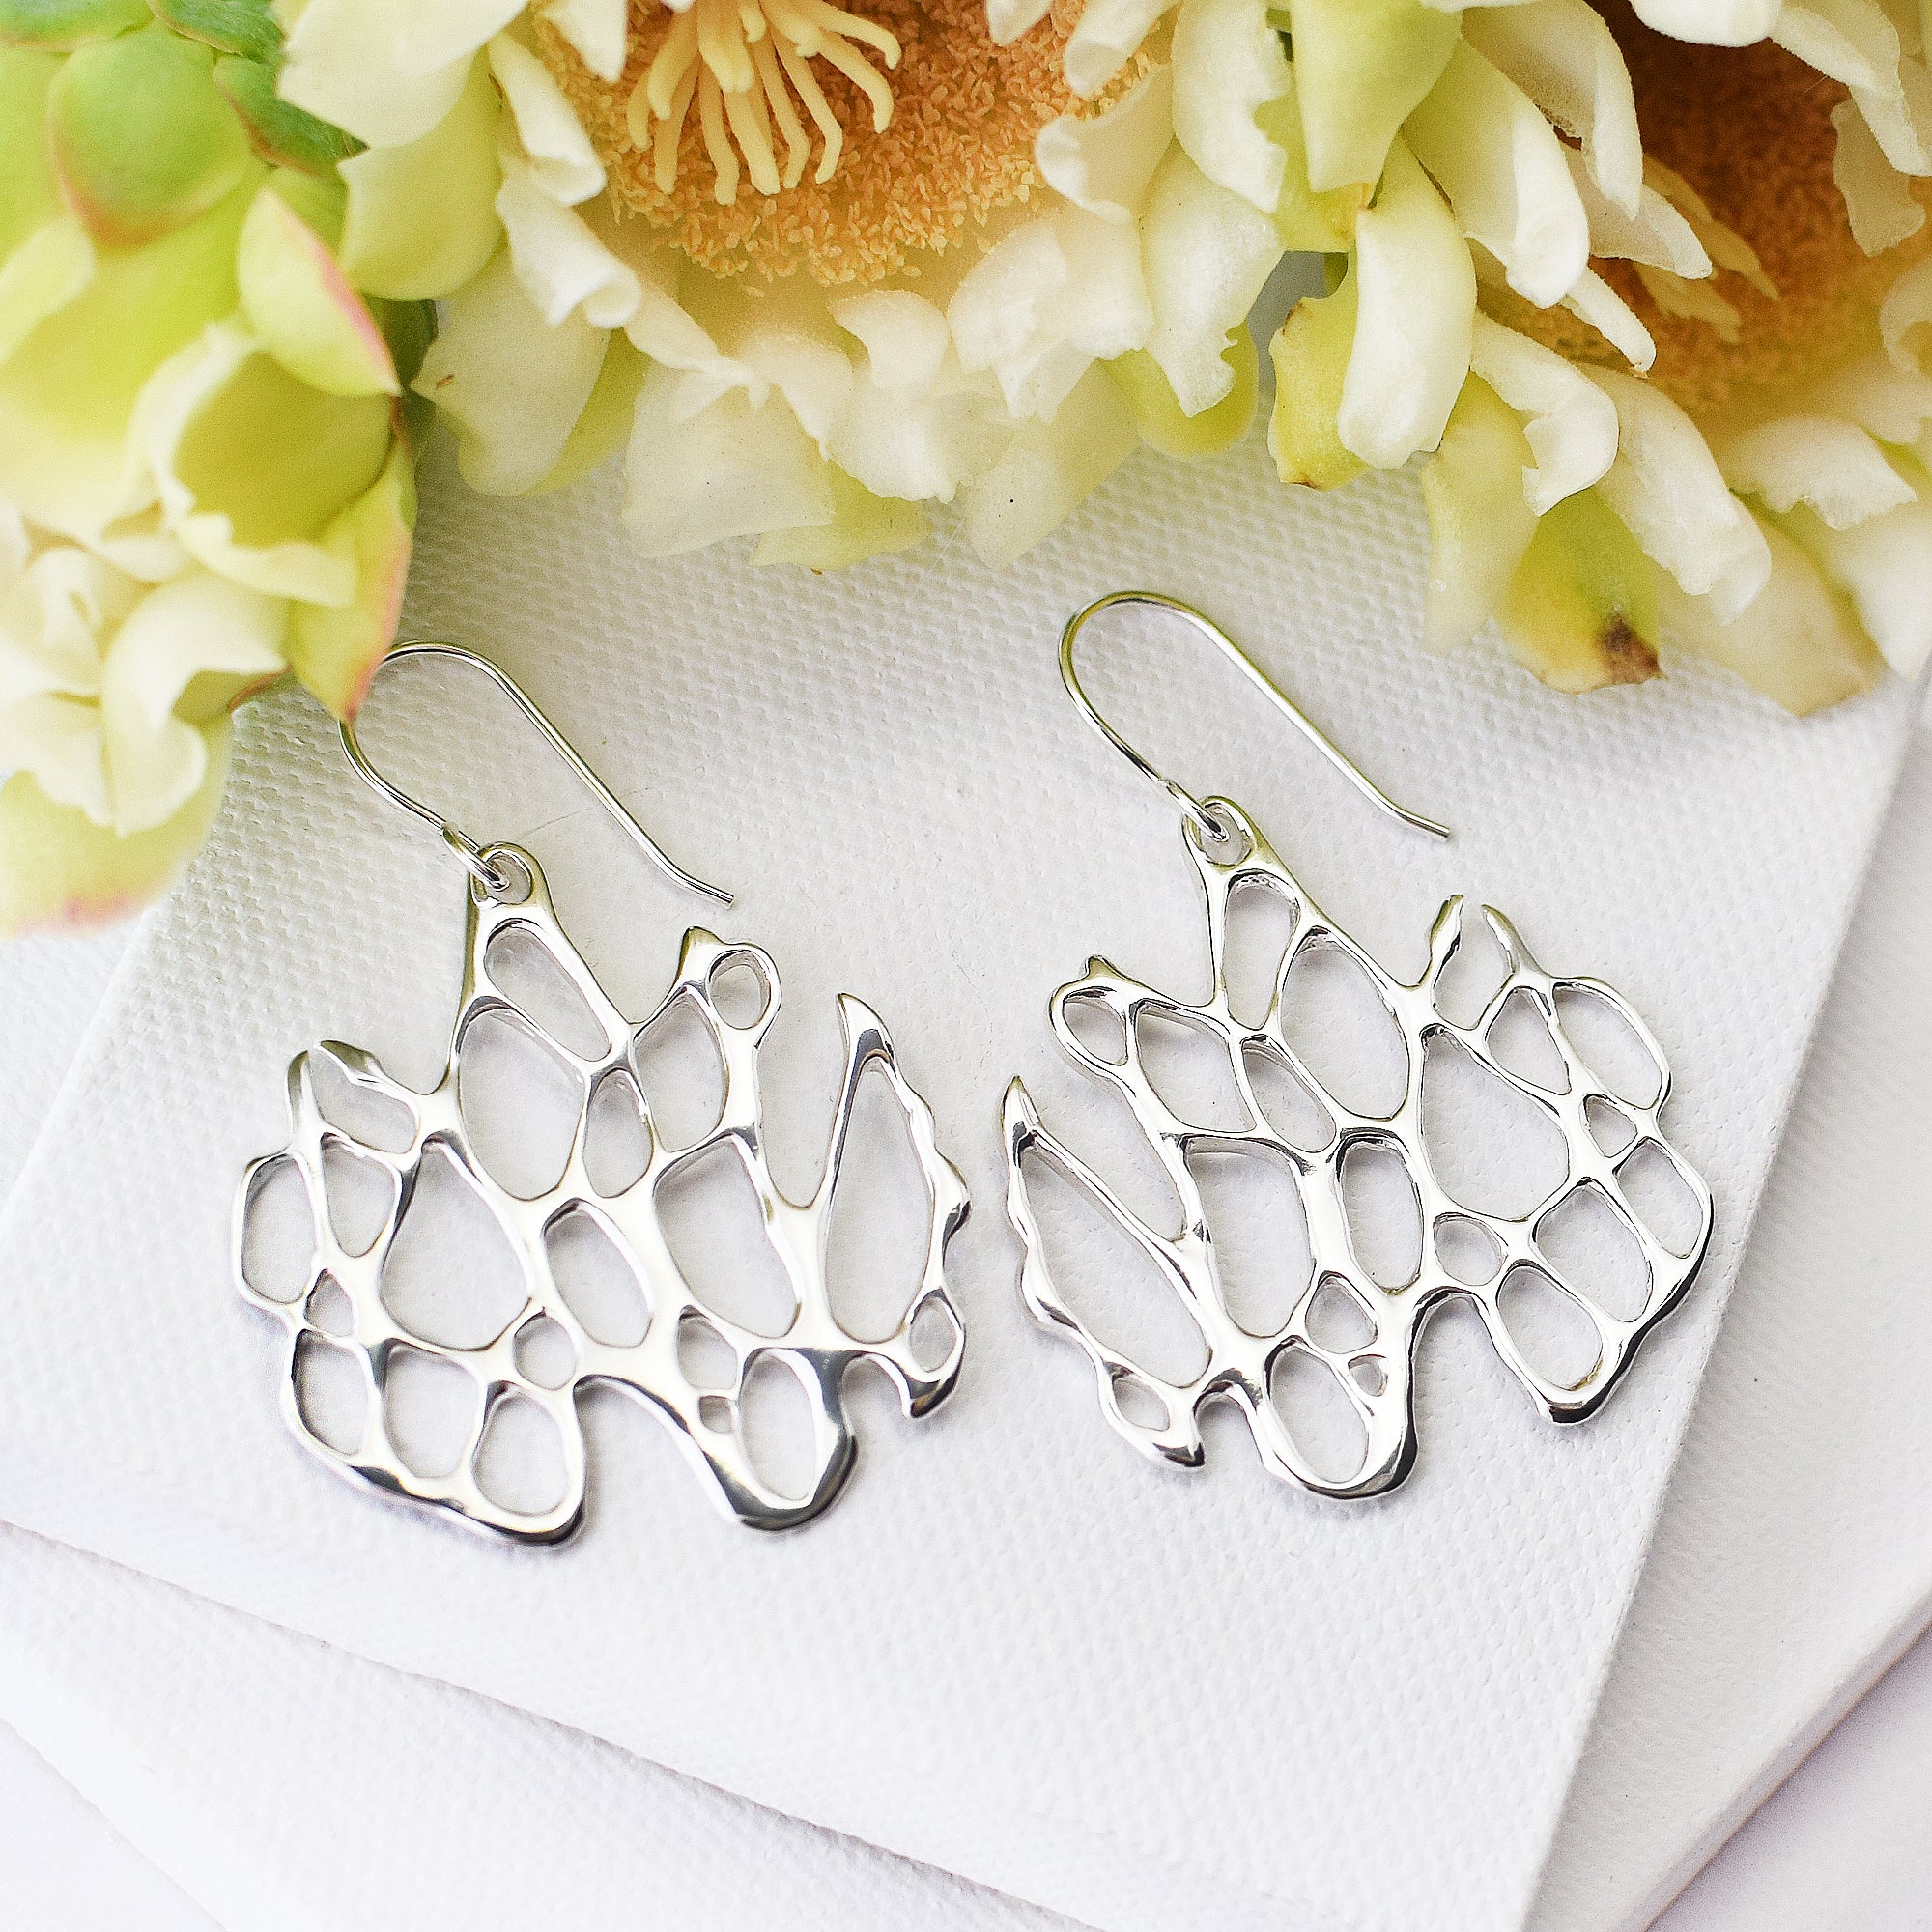 statement silver cactus earrings on white blocks with cactus flower accent